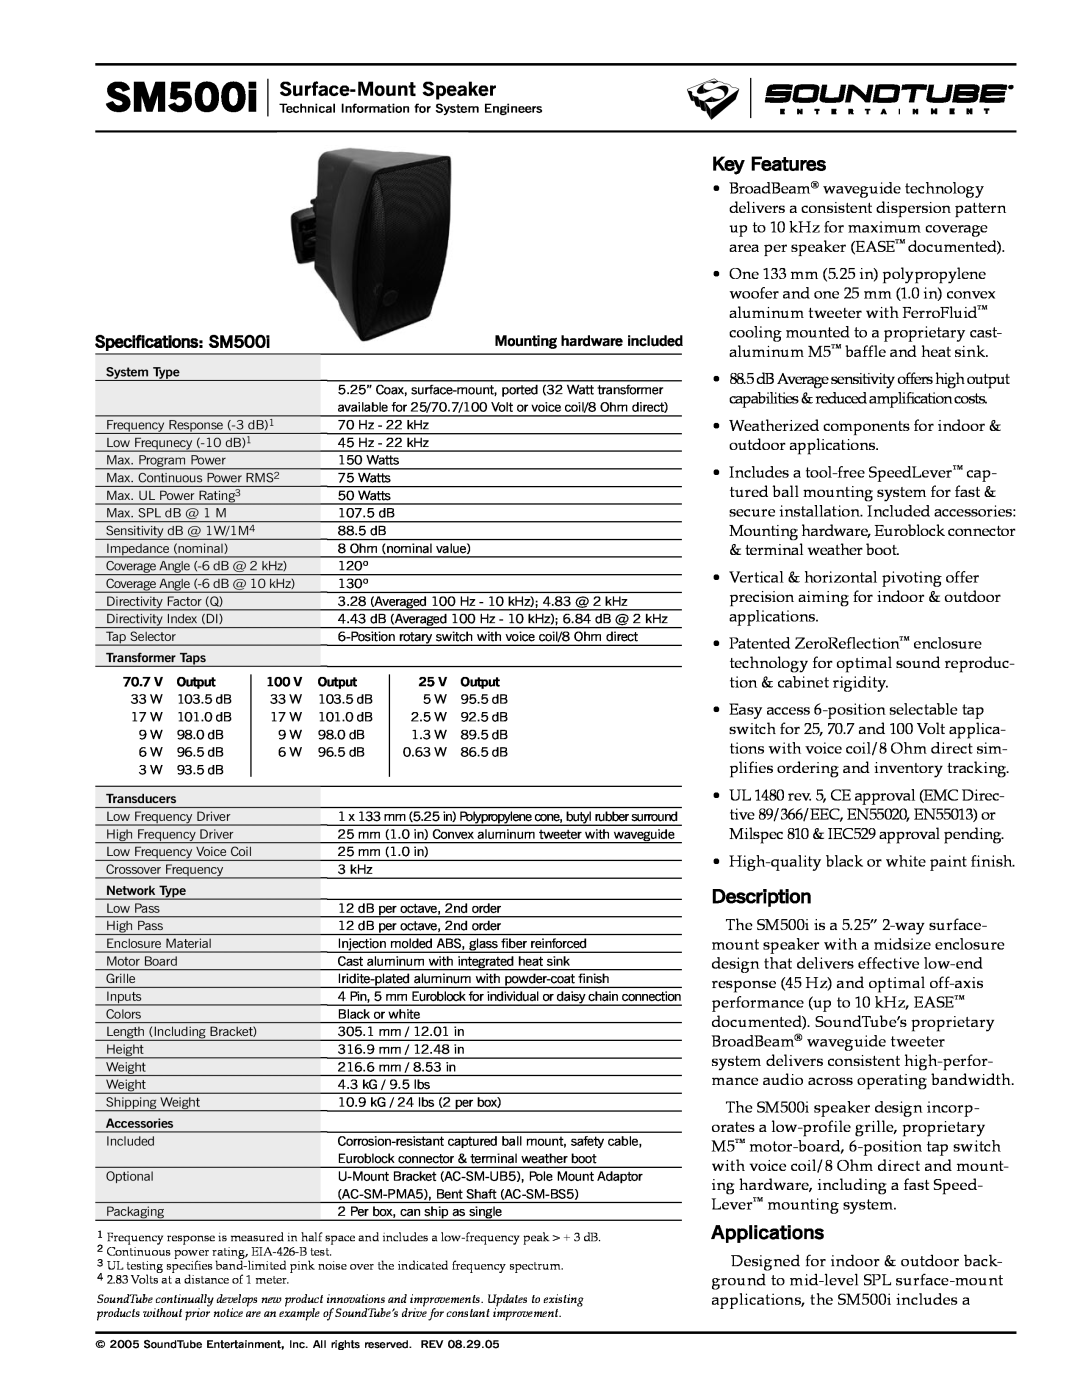 Phase Technology specifications SM500i Surface-MountSpeaker, Key Features, Description, Applications 